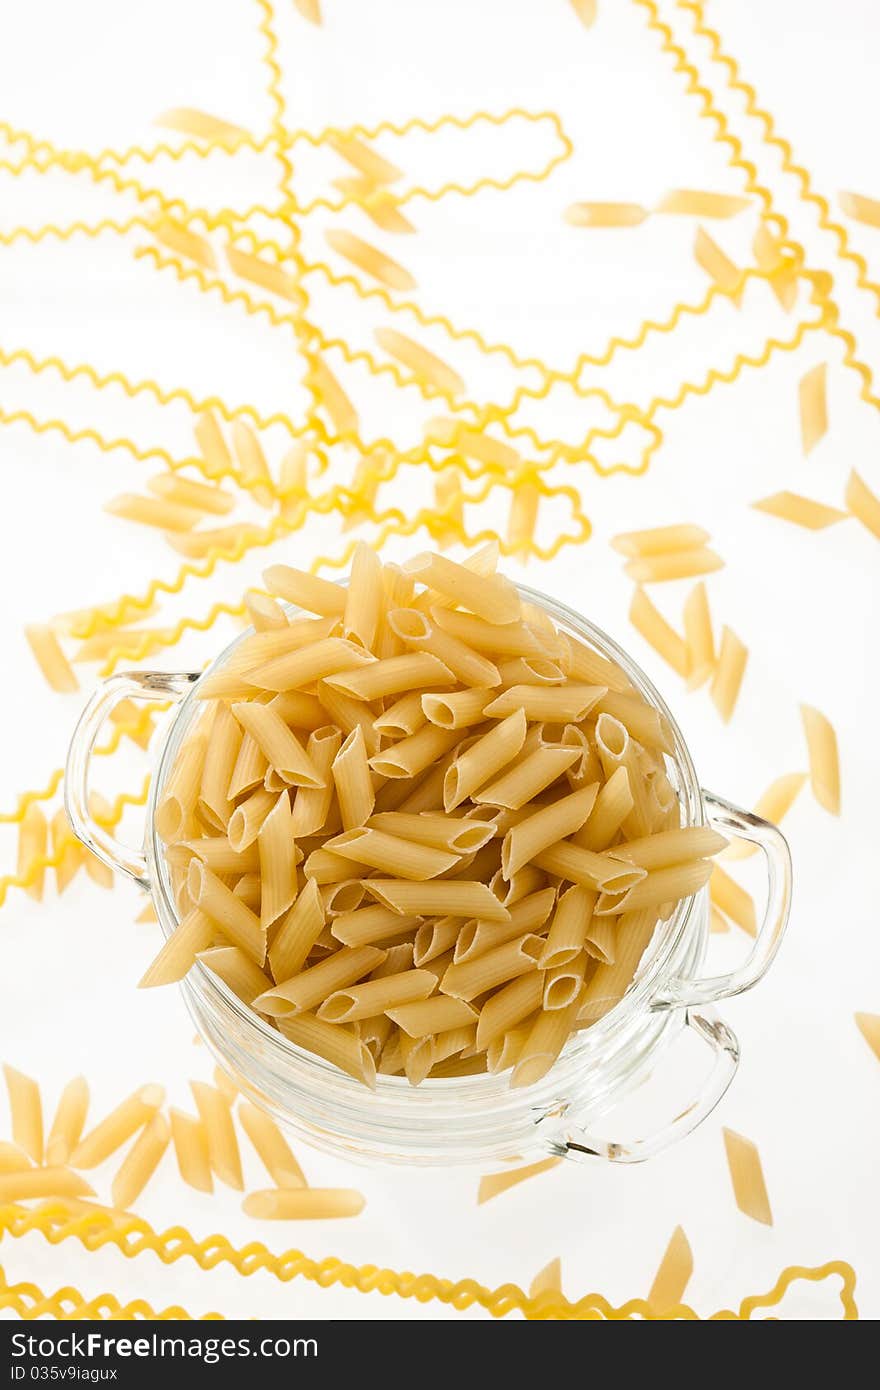 Food series: uncooked pasta in glassy bowl